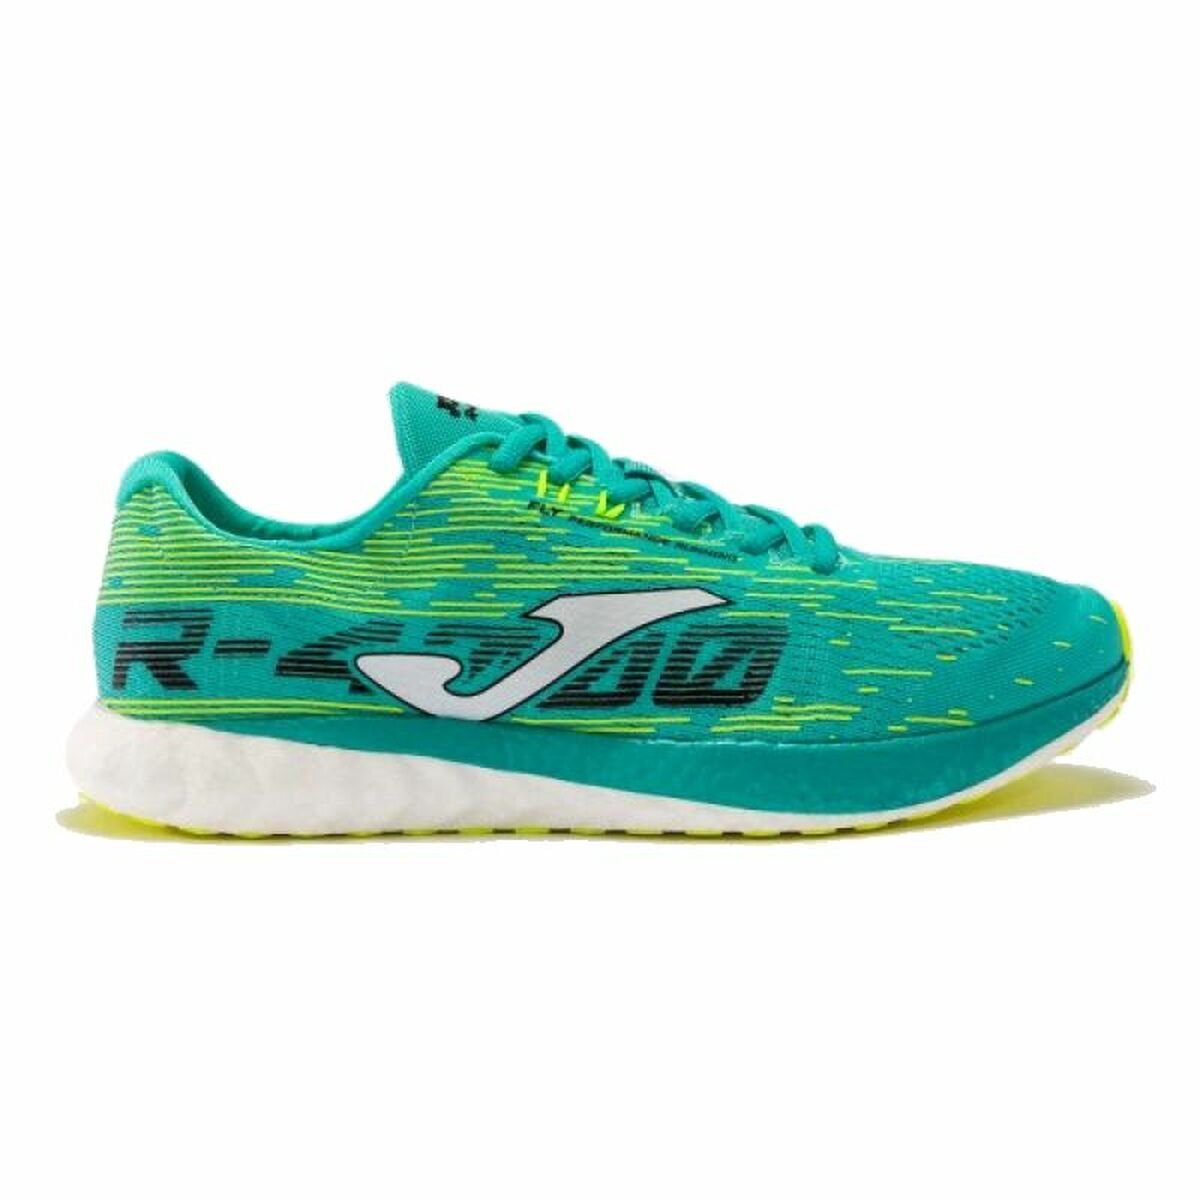 Chaussures de Running pour Adultes Joma Sport R.4000 Turquoise